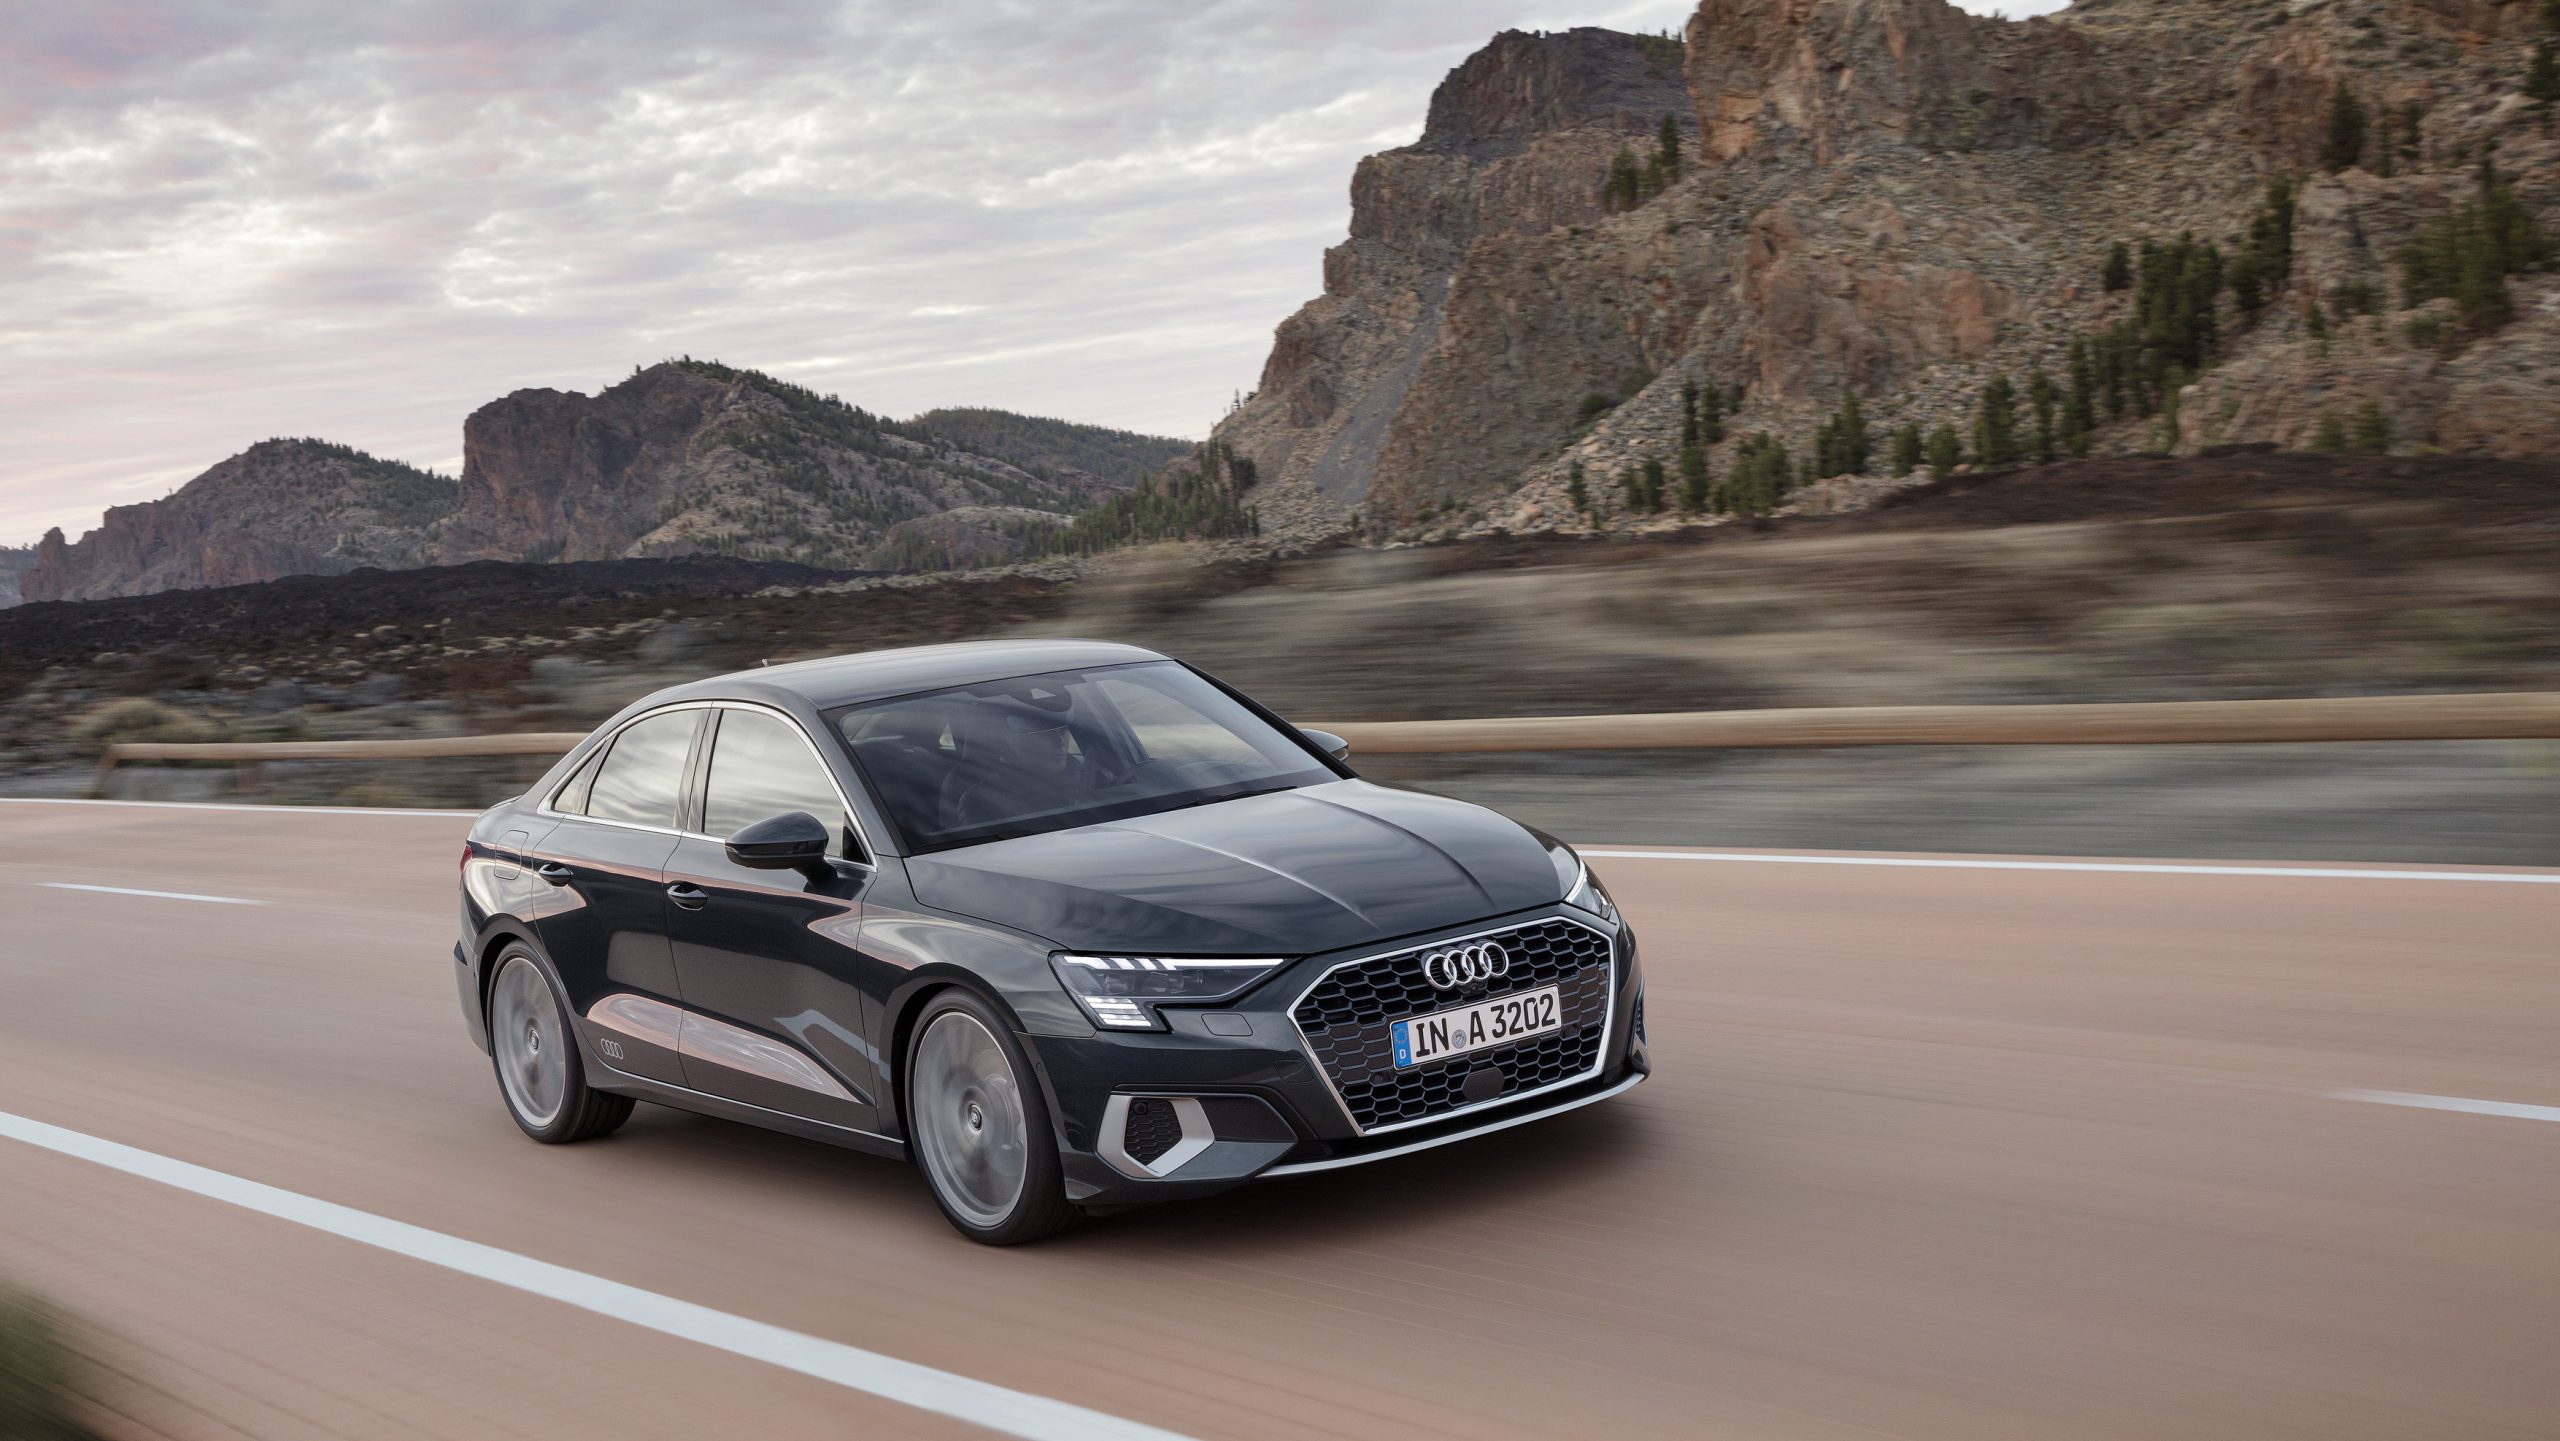 A 3/4 front view of a dark gray 2022 Audi A3 sedan driving on a road with mountains in the background.